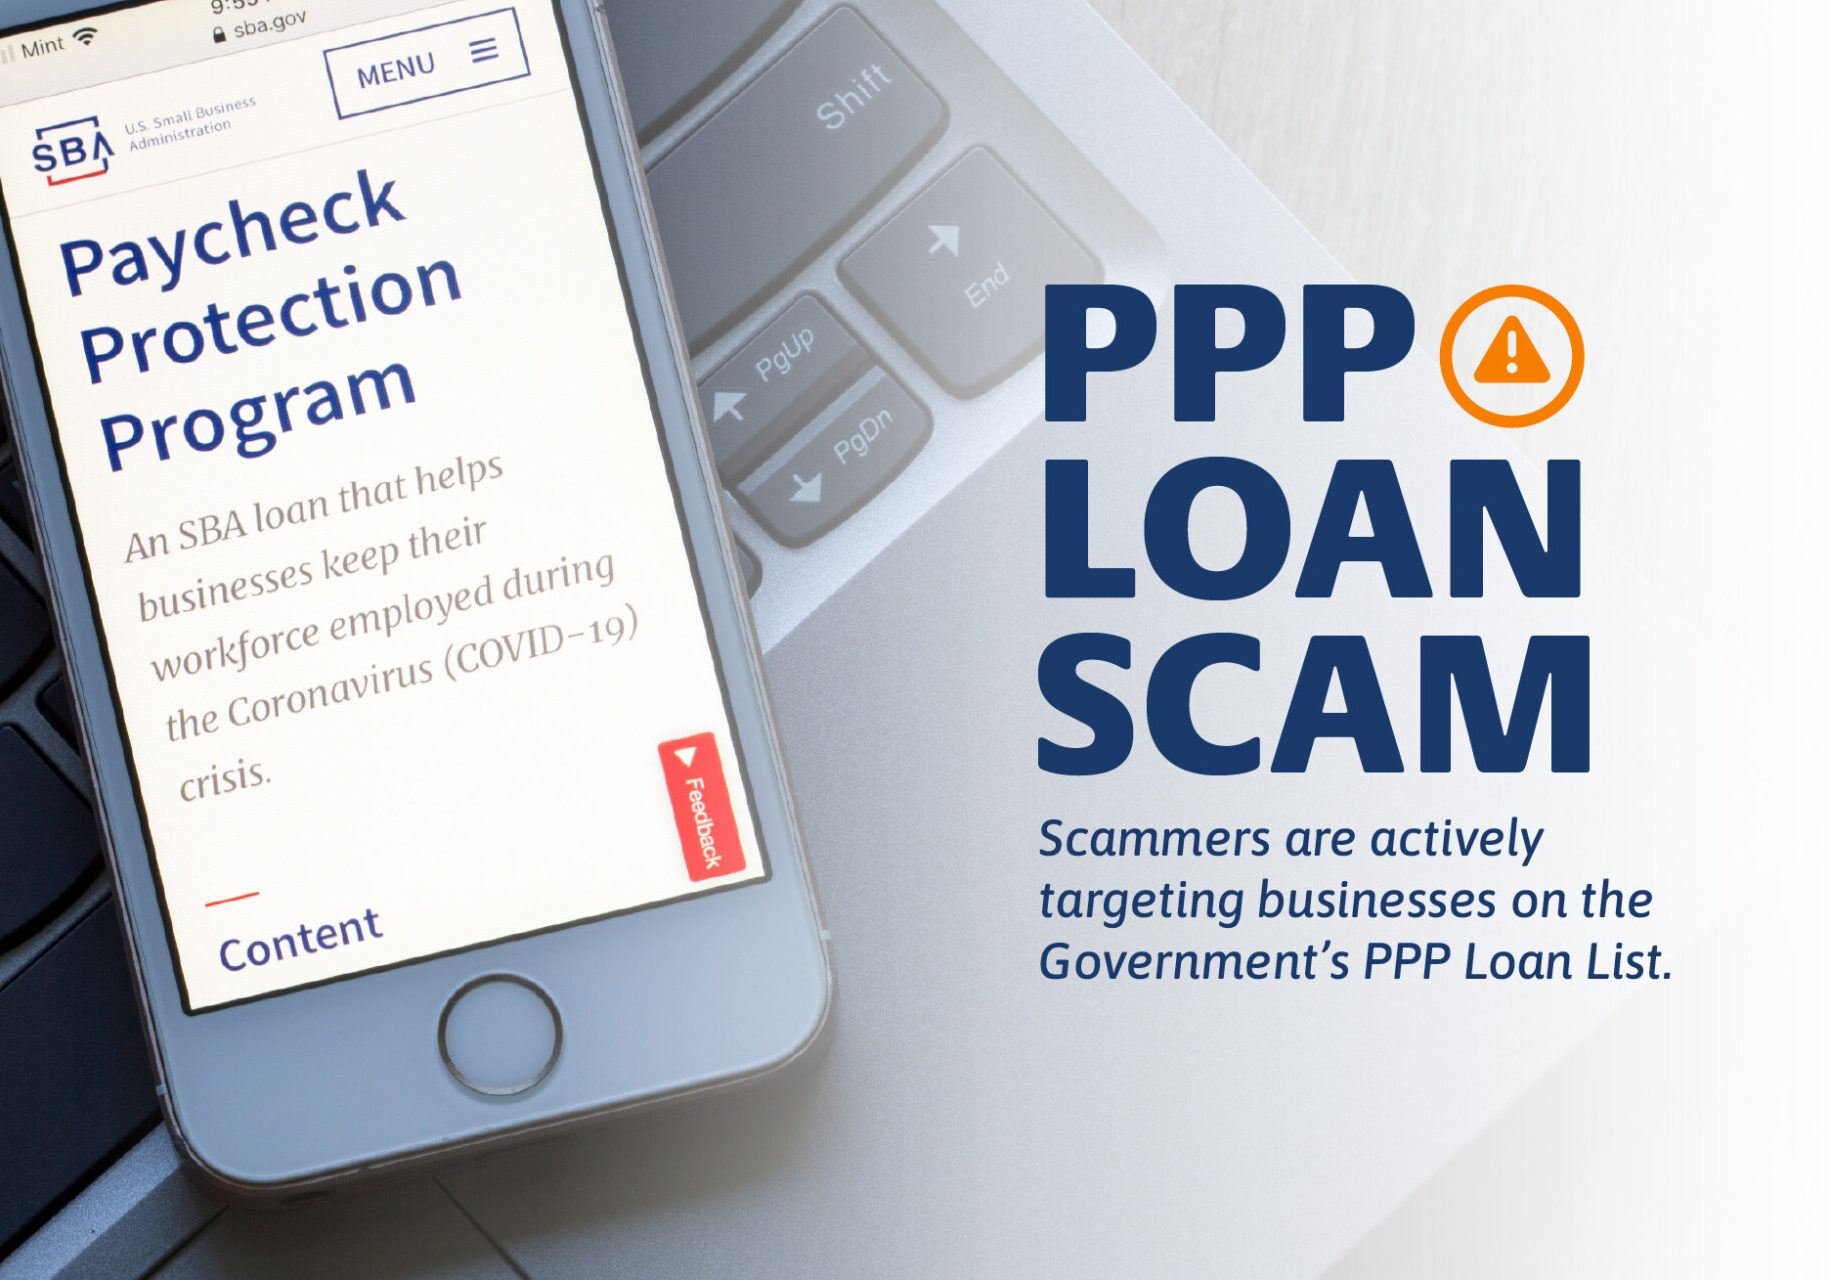 Graphic stating "PPP Loan Scam Alert. Scammers are actively targeting businesses on the Government’s PPP Loan List."